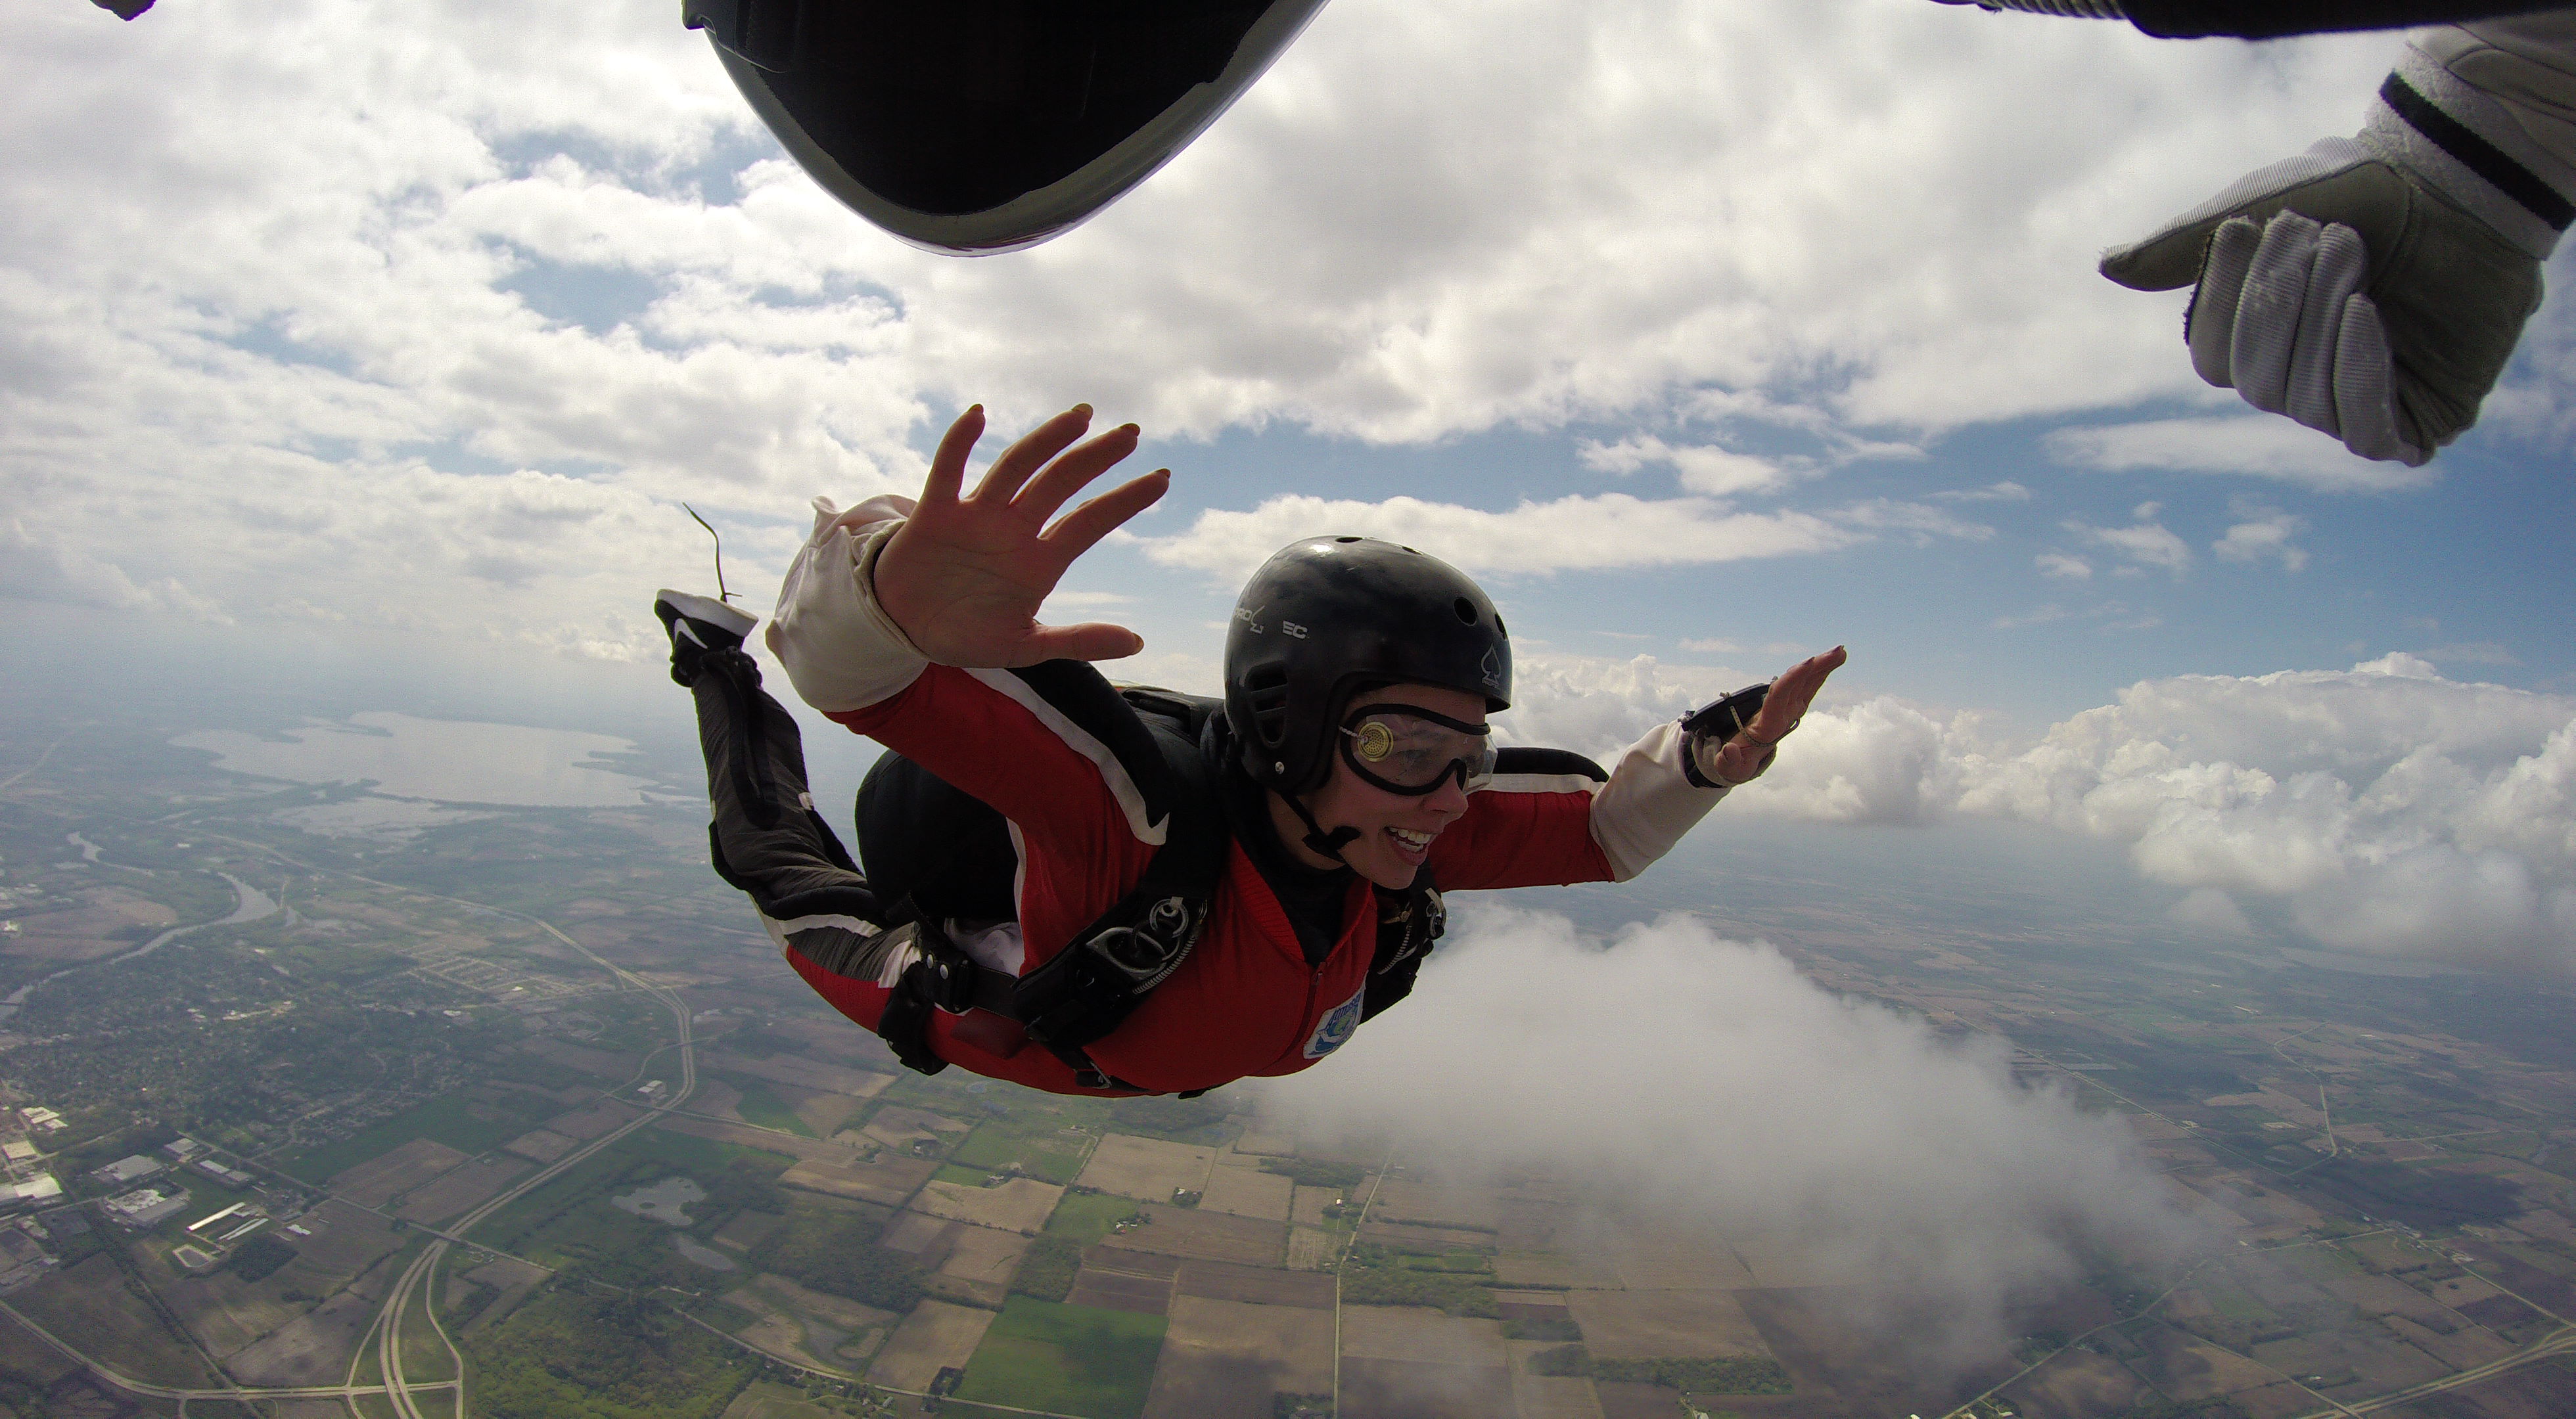 Woman flying like superman in freewill at Wisconsin Skydiving Center near Milwaukee